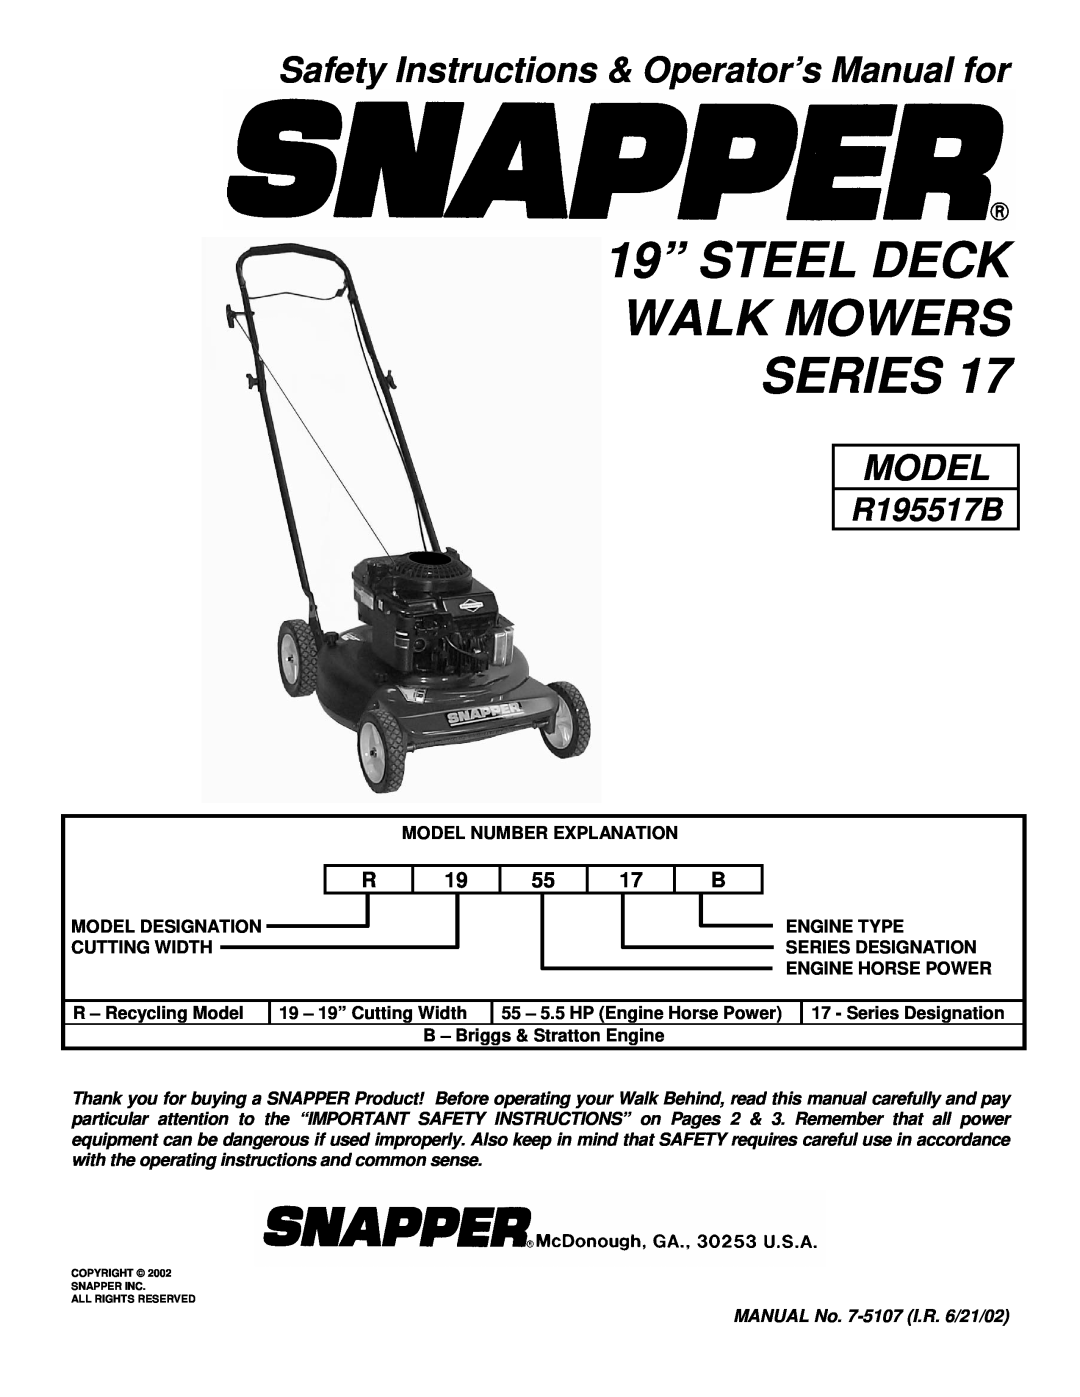 Snapper R195517B important safety instructions Safety Instructions & Operator’s Manual for, Model 